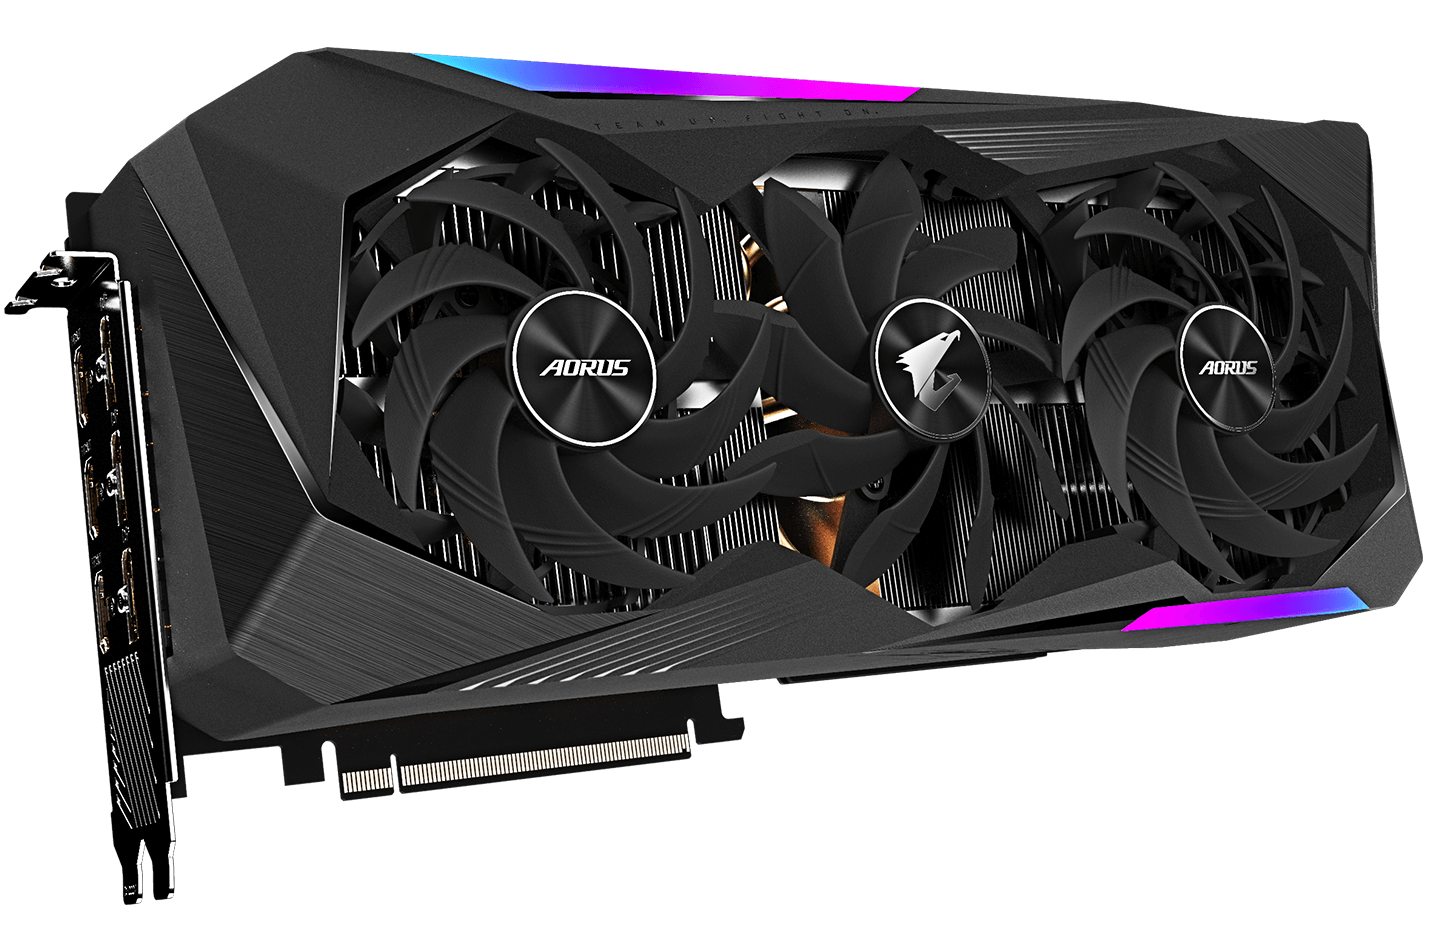 Graphics Card MASTER Ti Features GIGABYTE RTX™ AORUS 3070 - 8G Key GeForce | Global